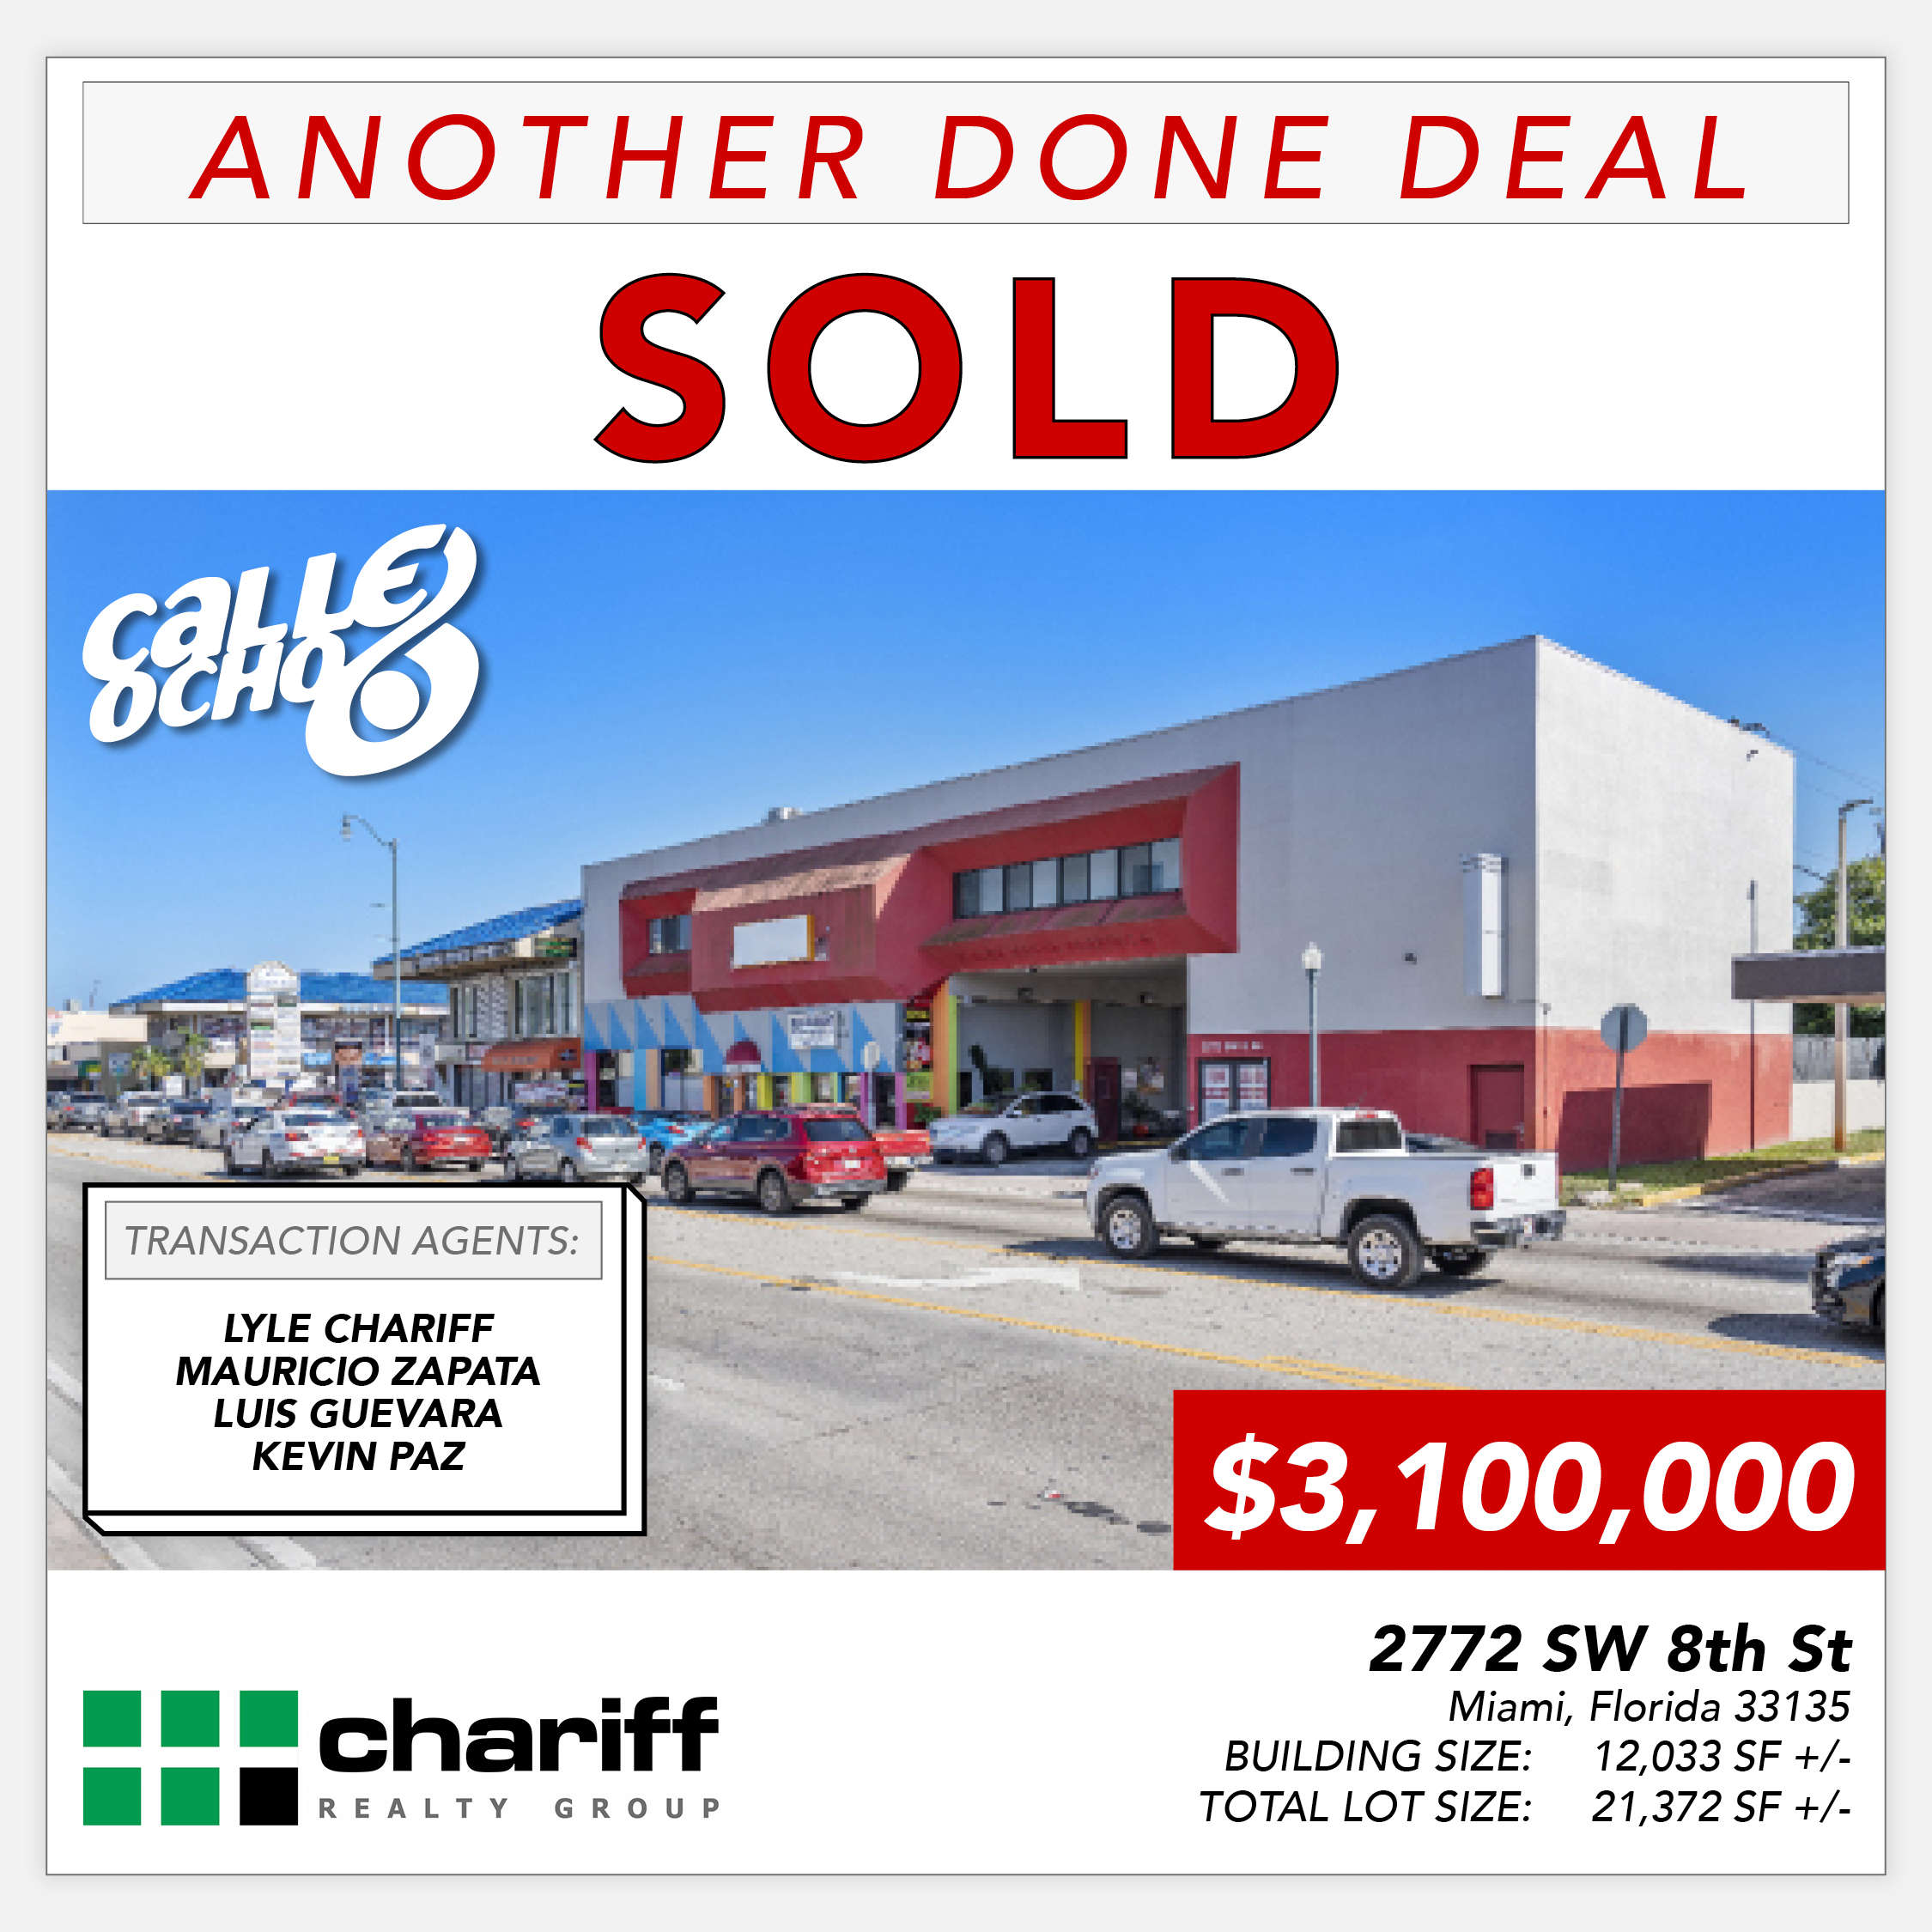 2772 SW 8th St - Another Done Deal - Sold - Little Havana - Miami-Florida-33135-Chariff Realty Group